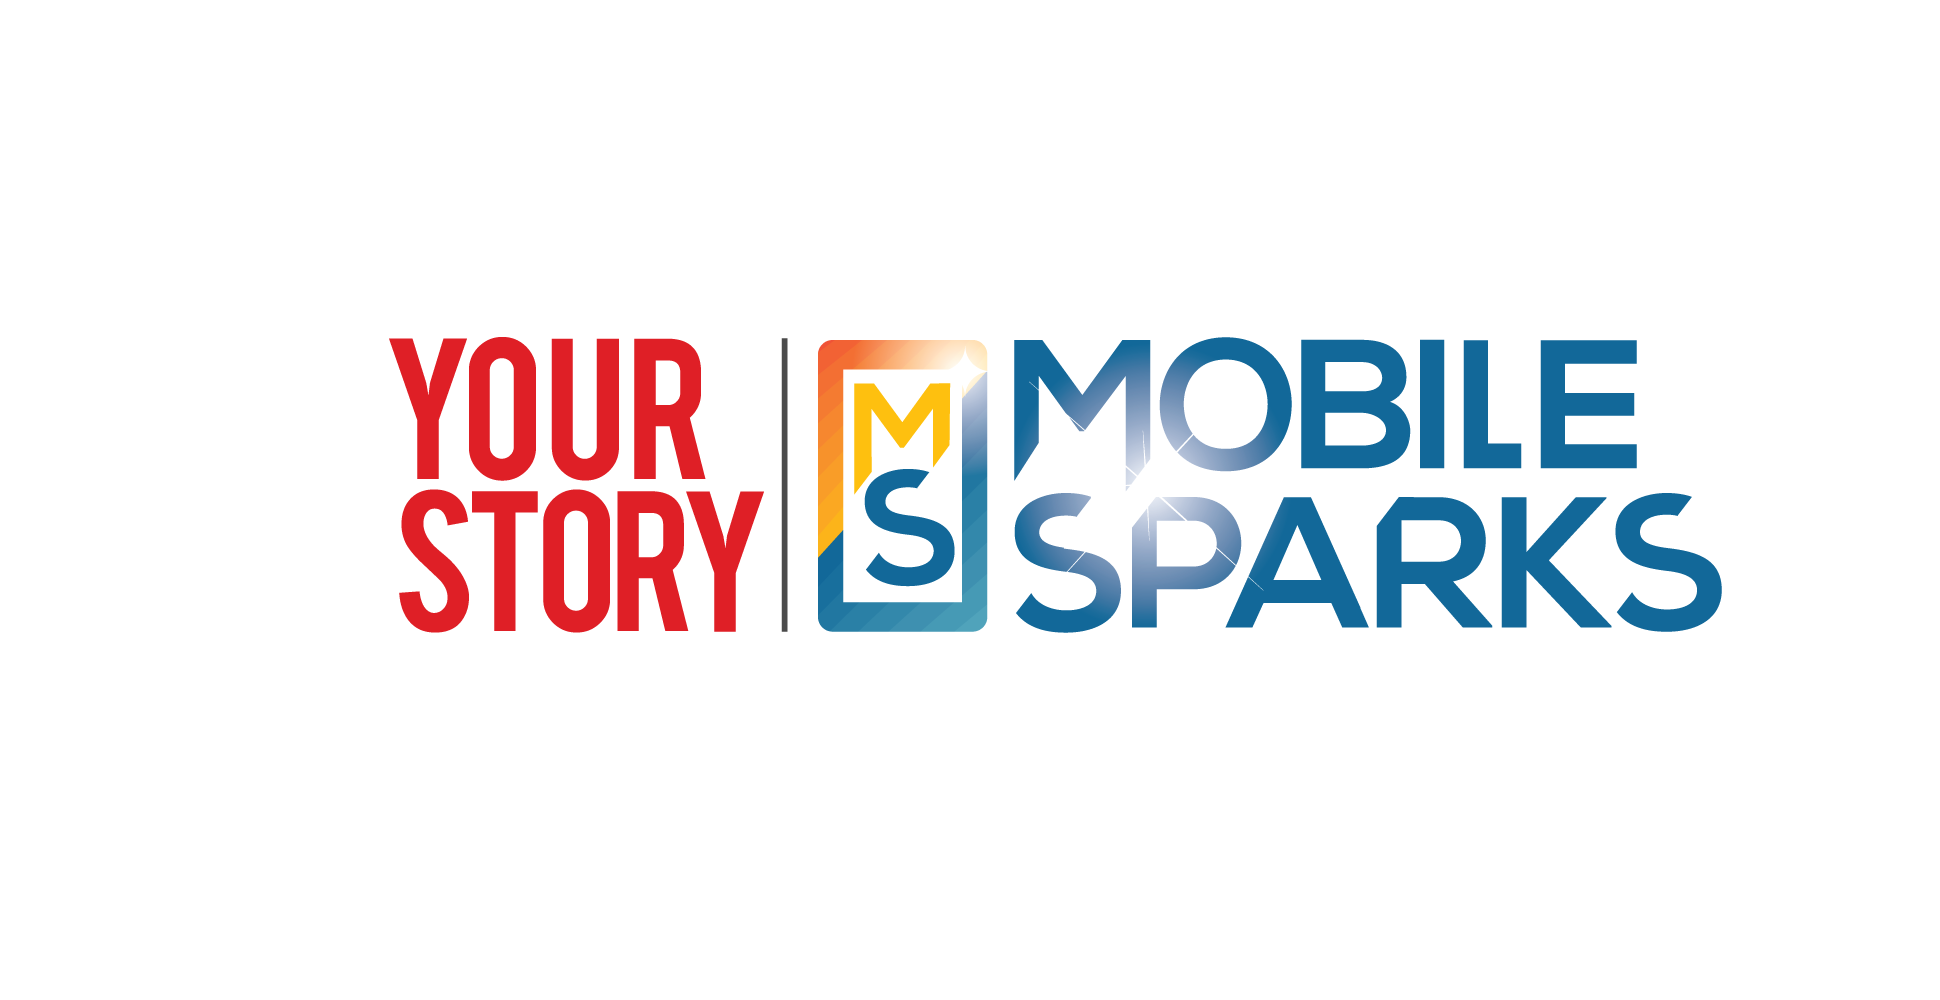 Top 20 Quotes from Mobile Sparks 2013!